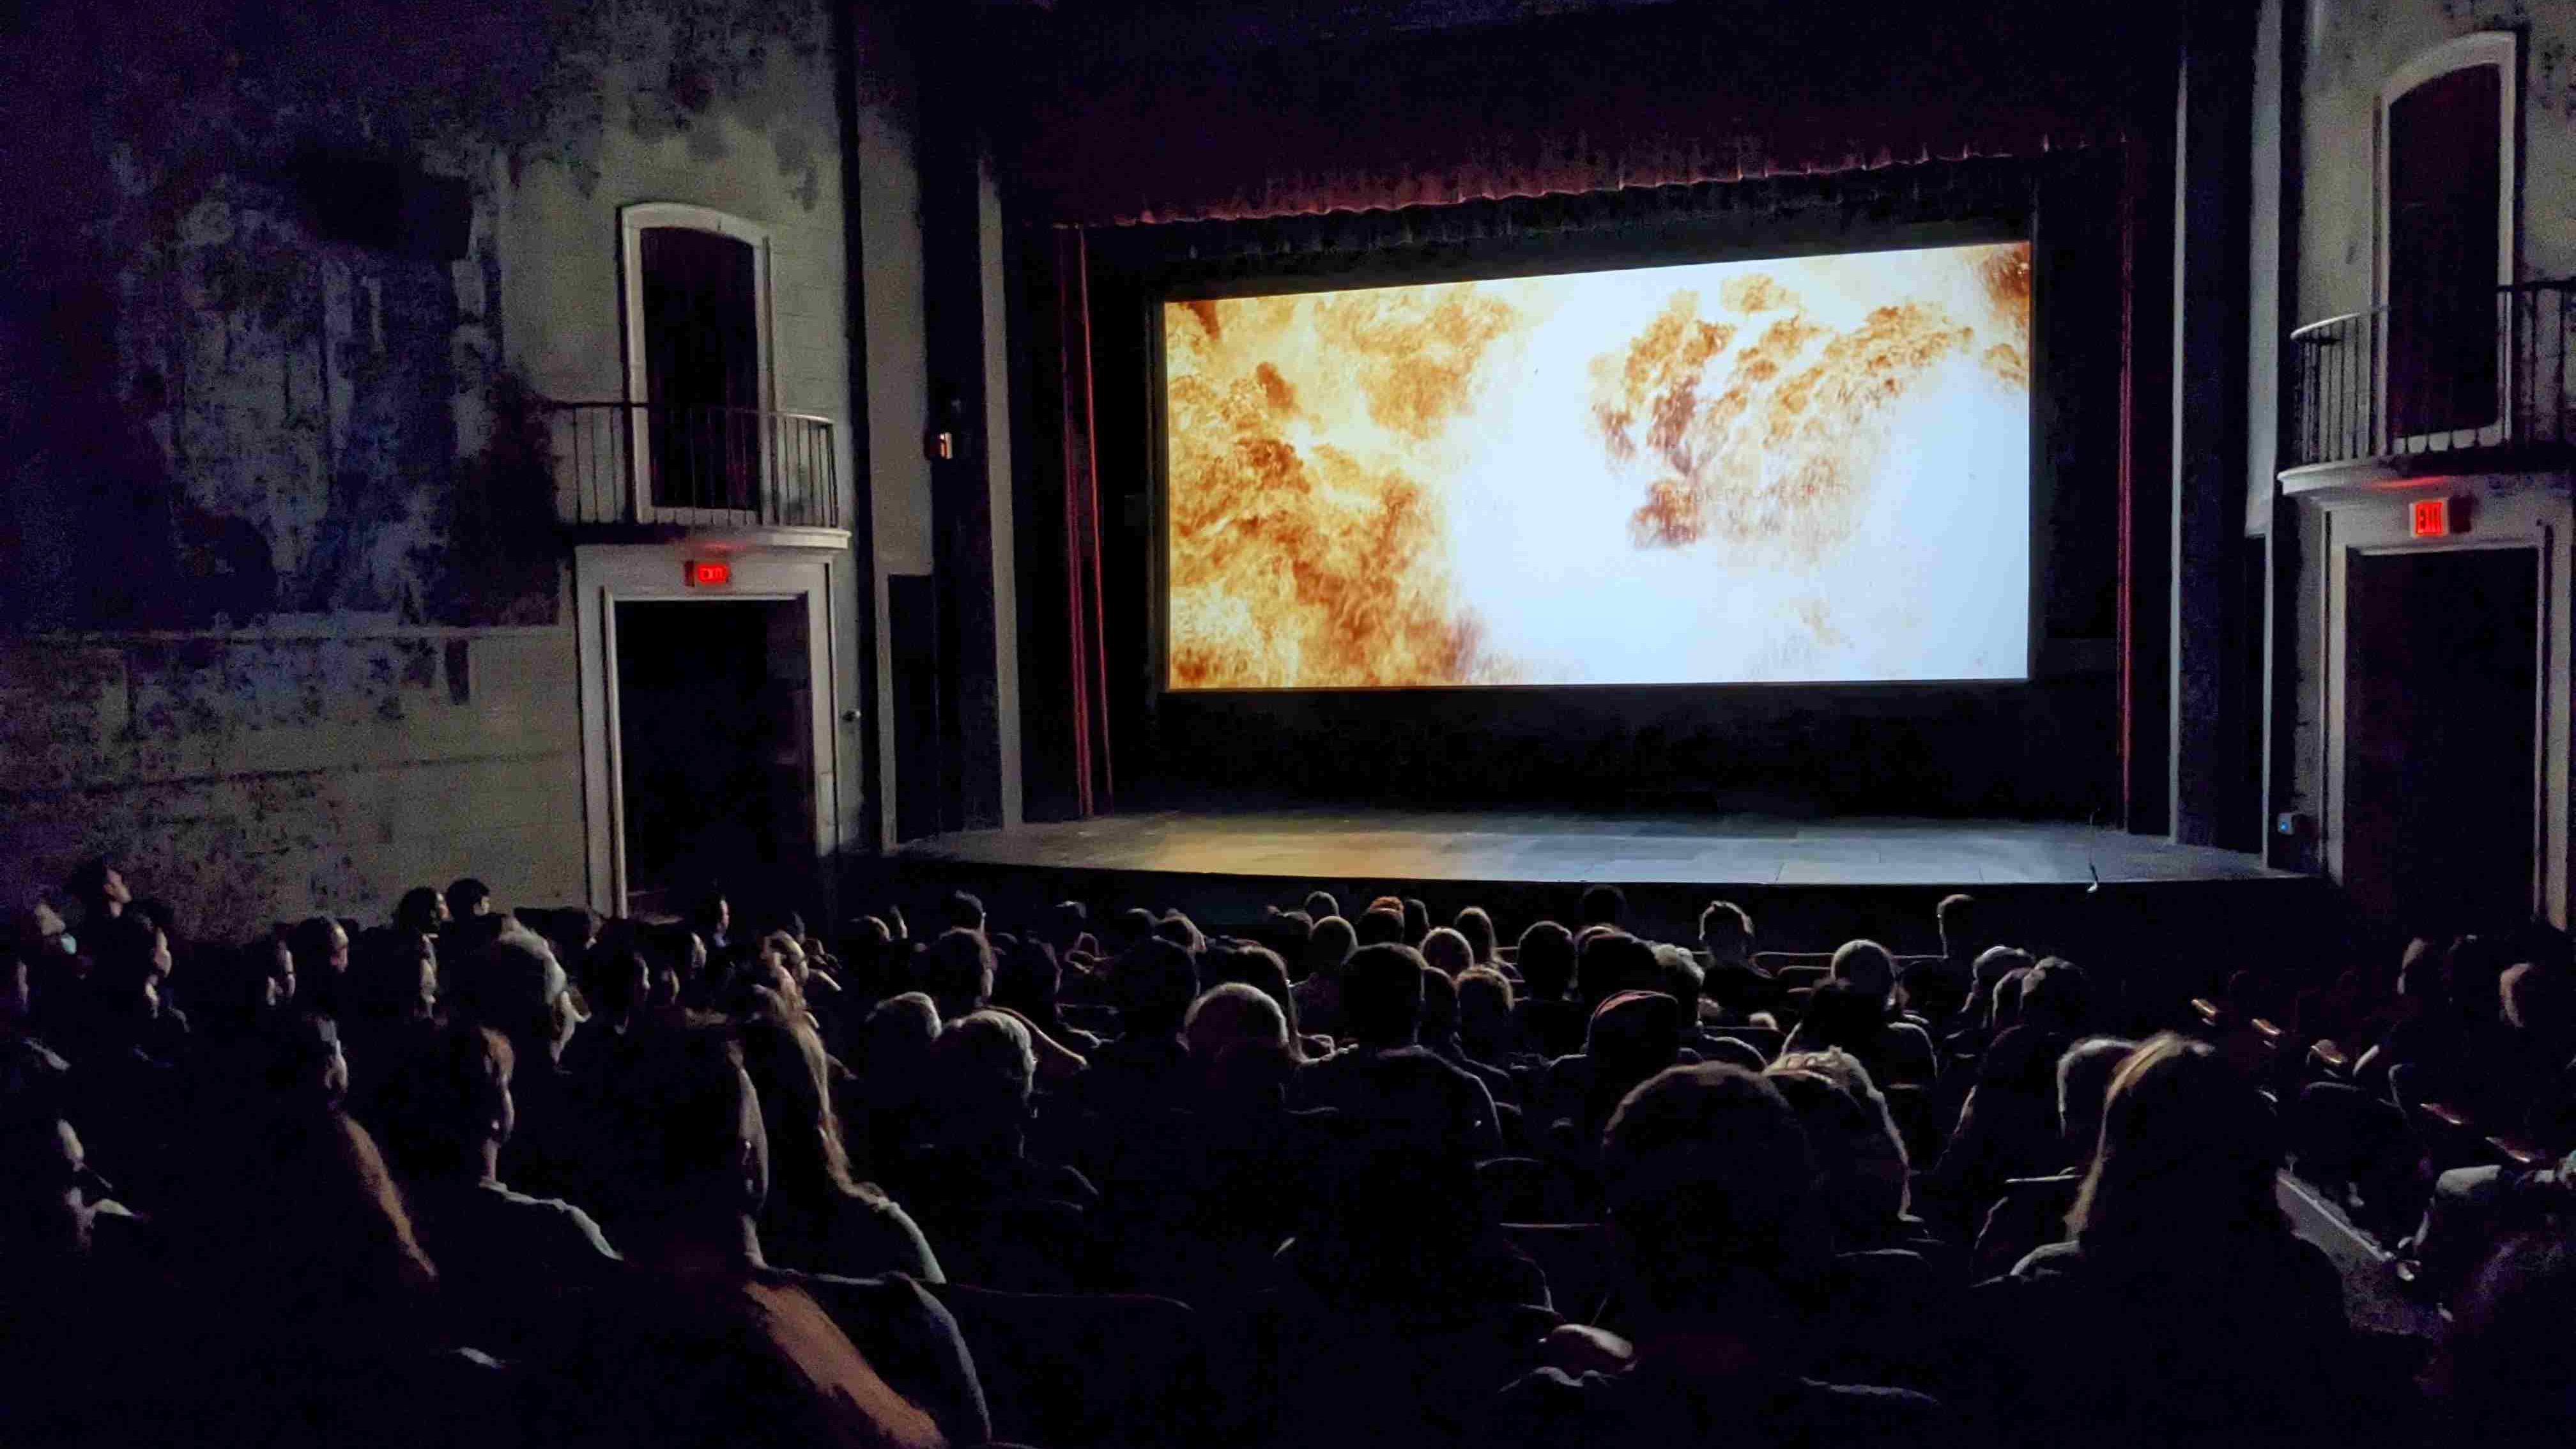 An audience sits in the dark looking at a movie screen filled with a fiery image from Christopher Nolan's Oppenheimer (2023).